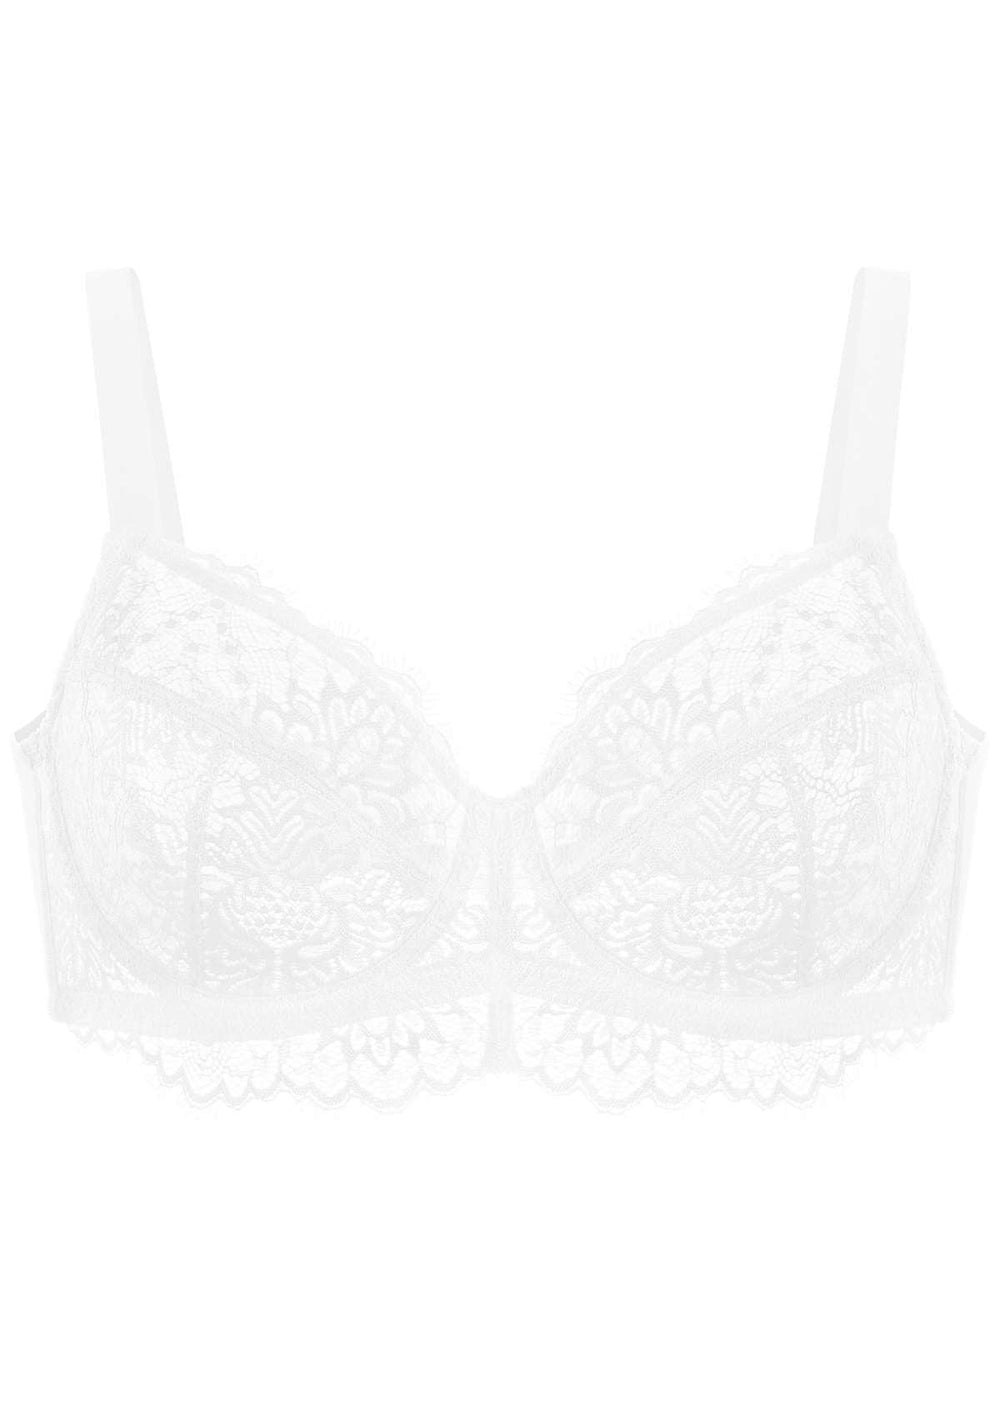 HSIA Sunflower Unlined Lace Bra: Best Bra for Wide Set Breasts